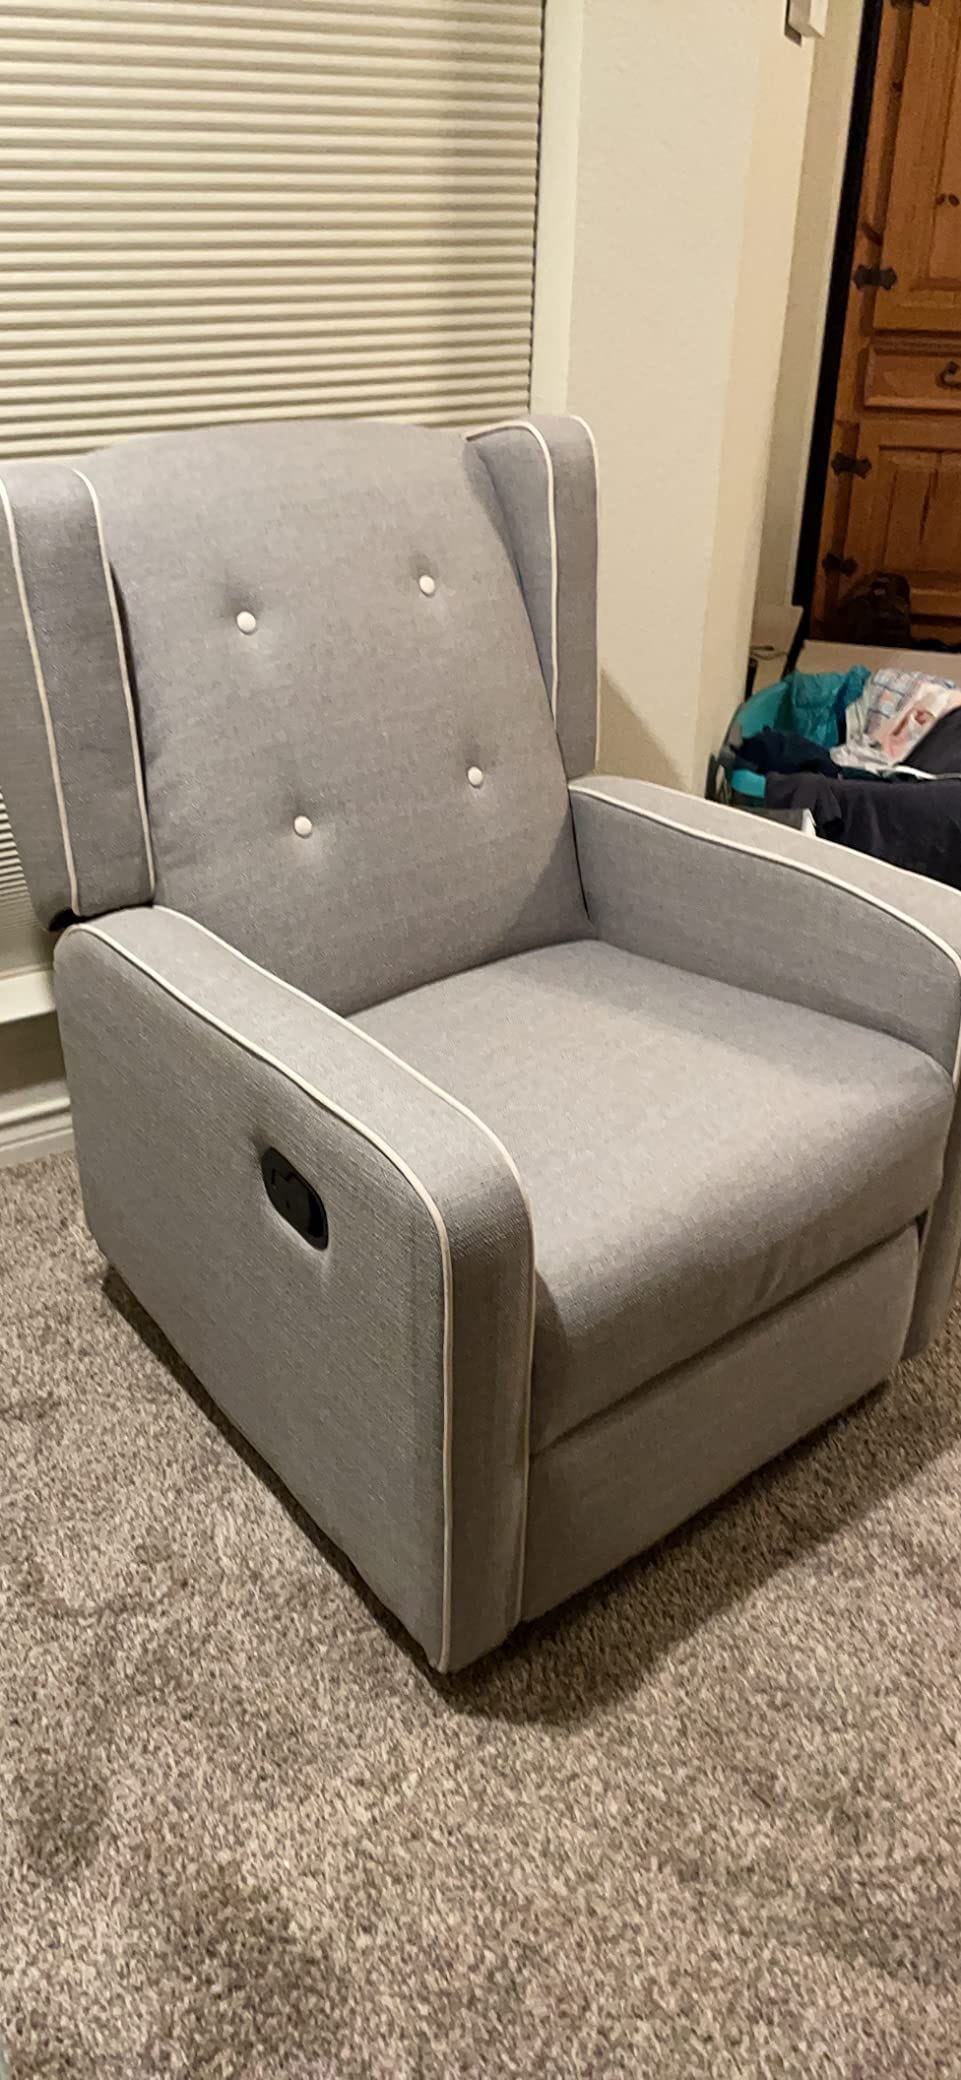 Best Chair For Pregnancy